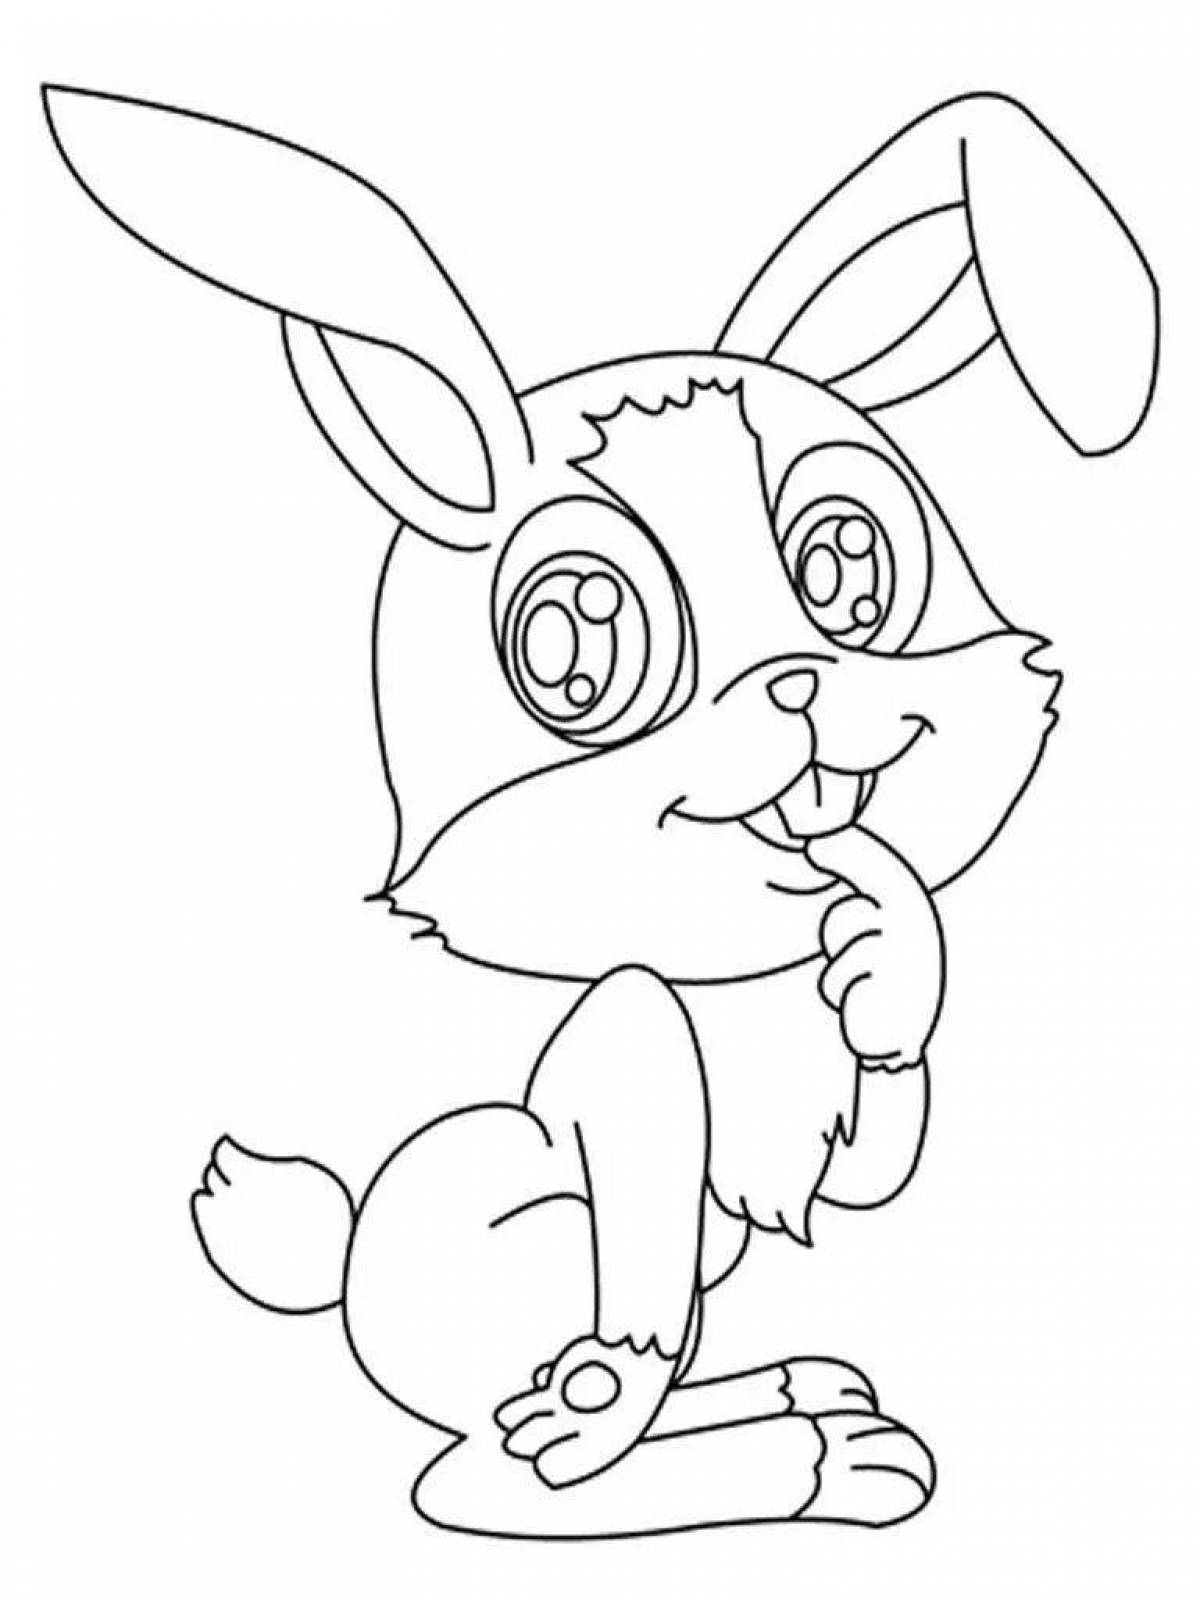 Busy coloring rabbit